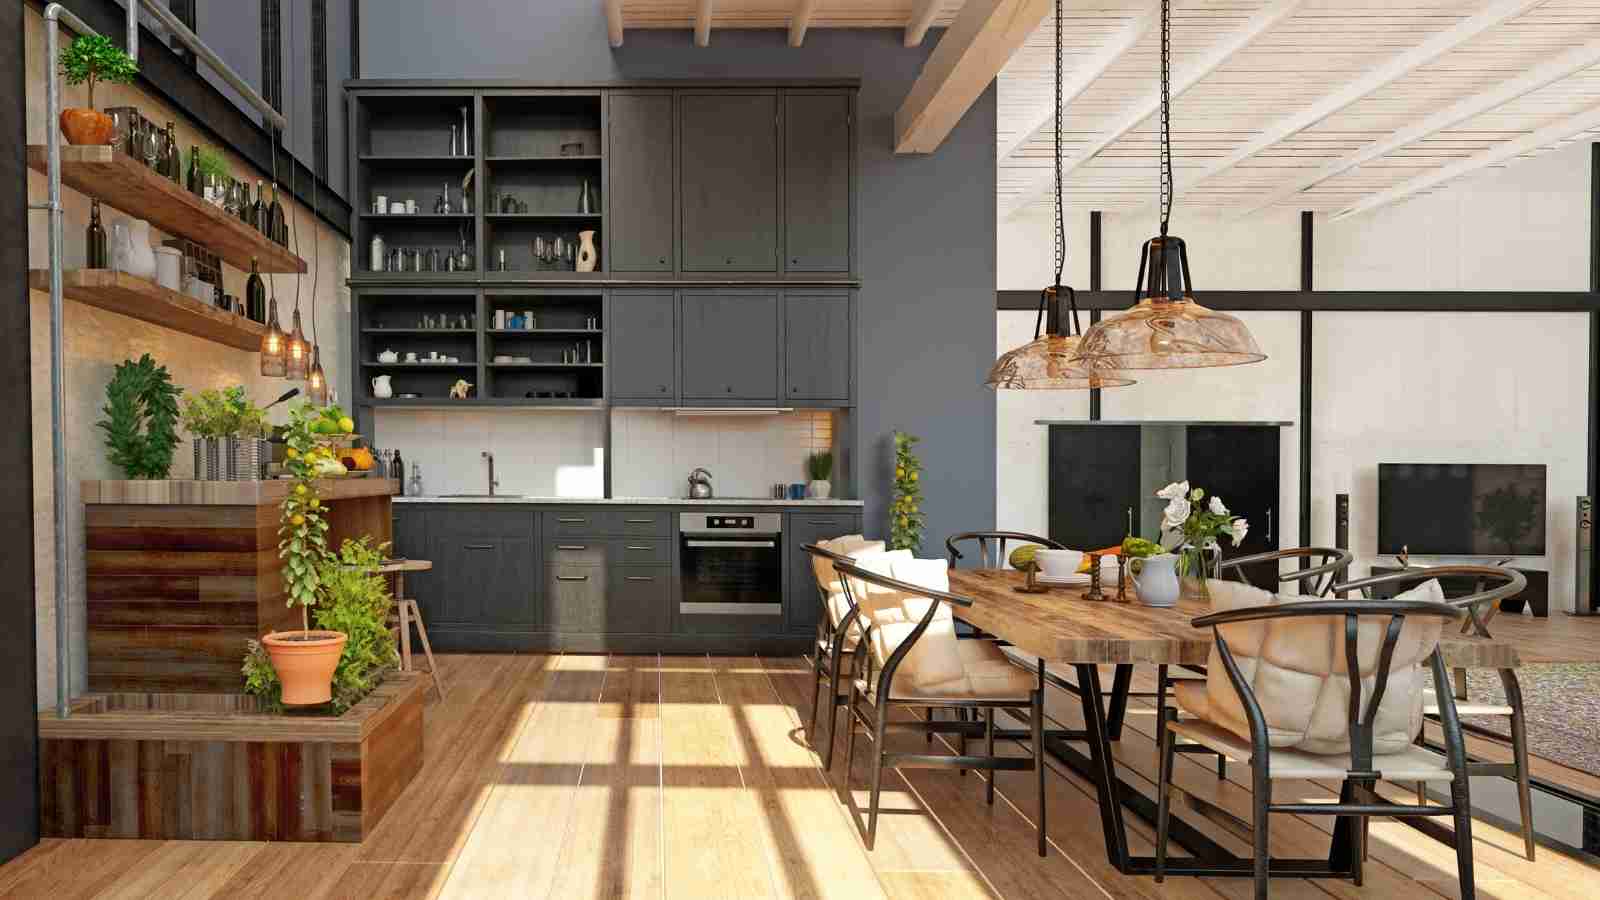 Best Flooring Options for Home Kitchens